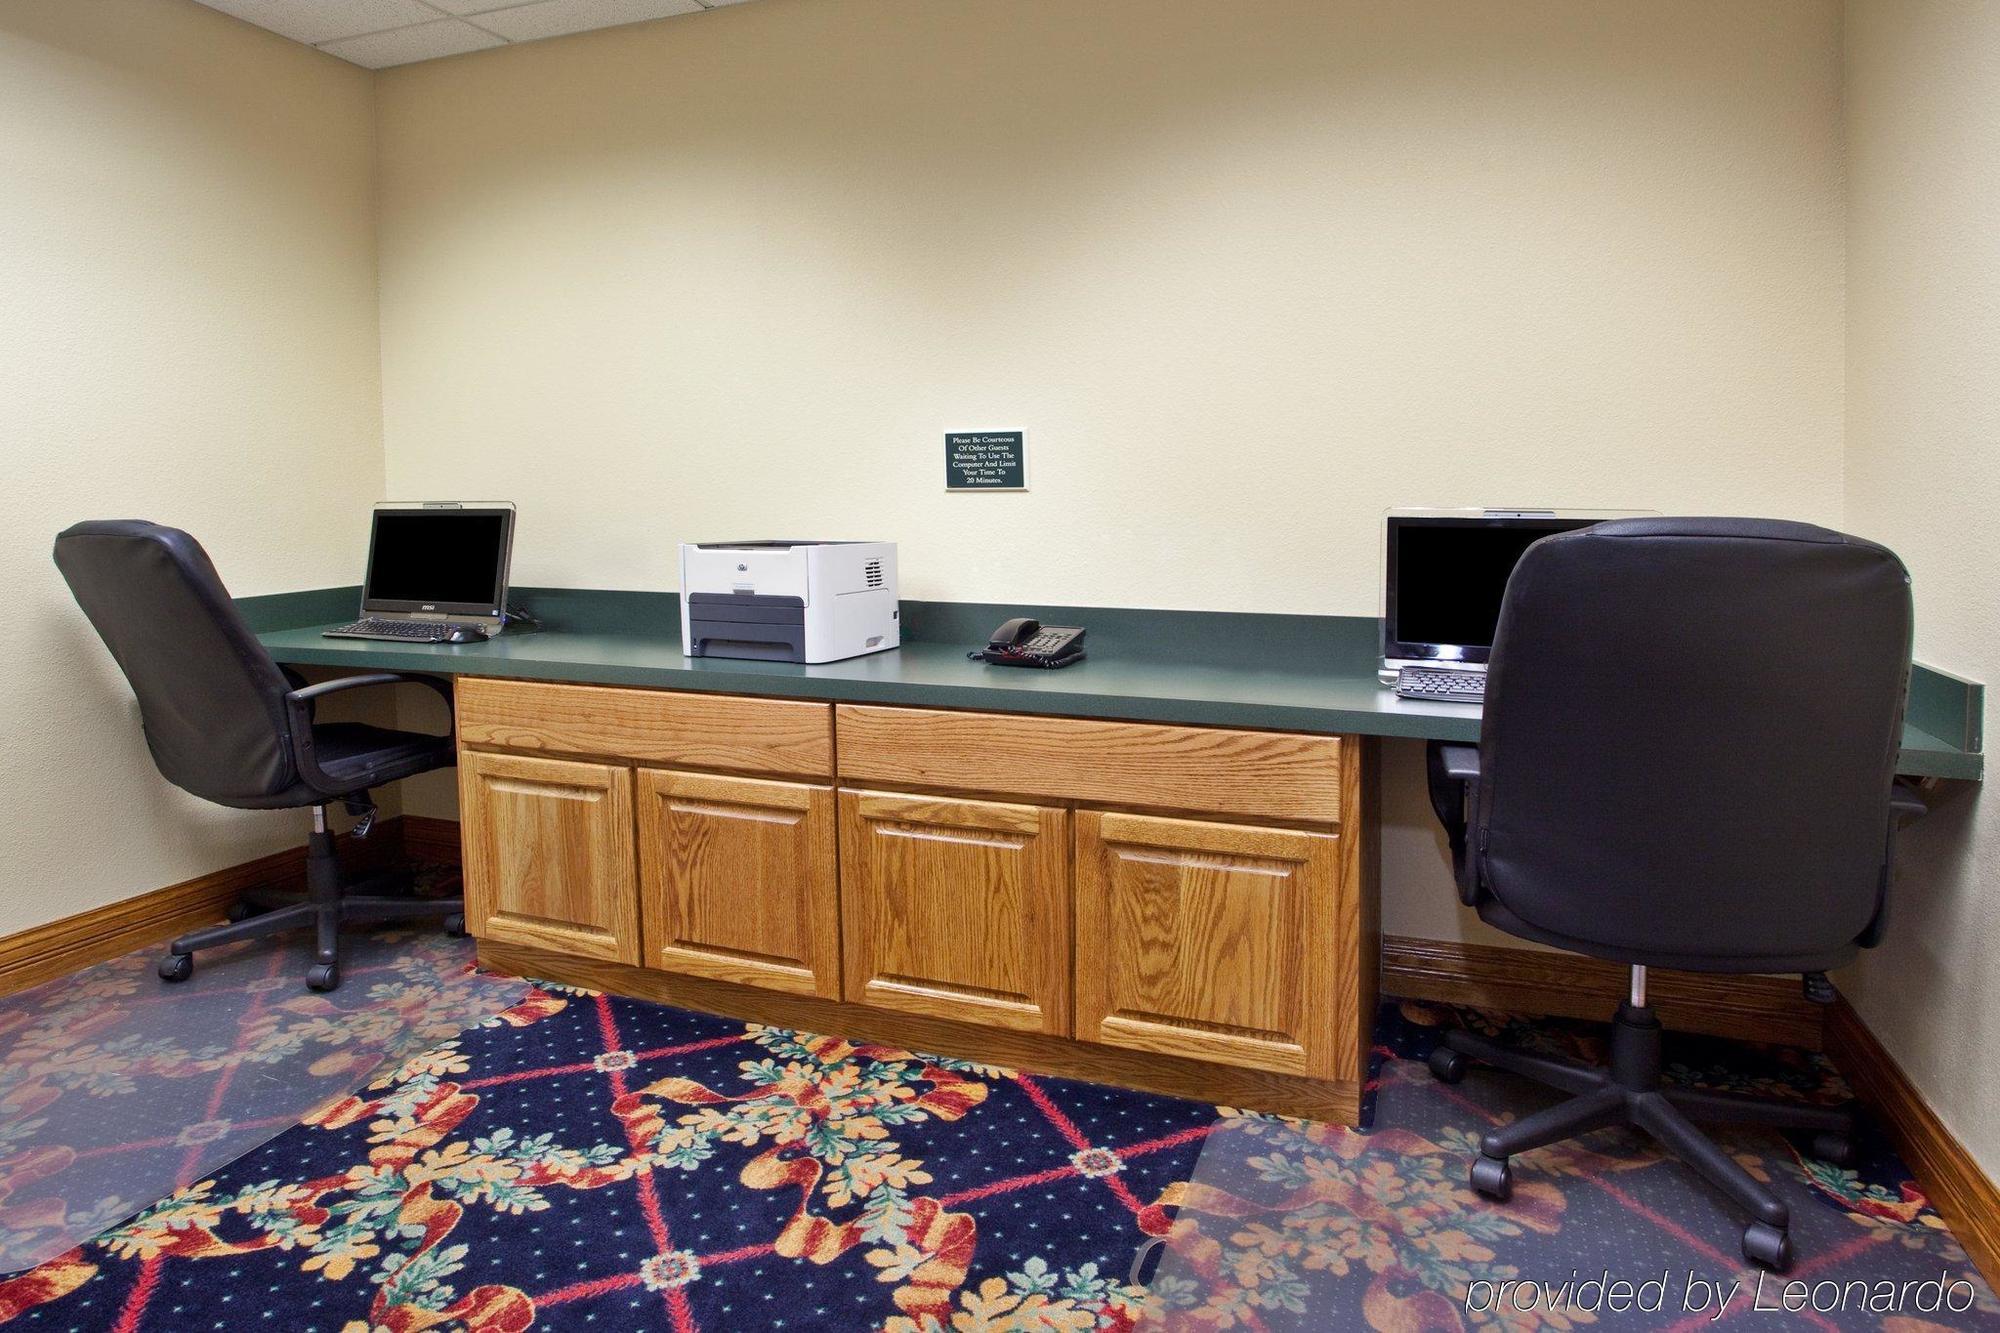 Country Inn & Suites By Radisson, Lawrenceville, Ga Facilities photo